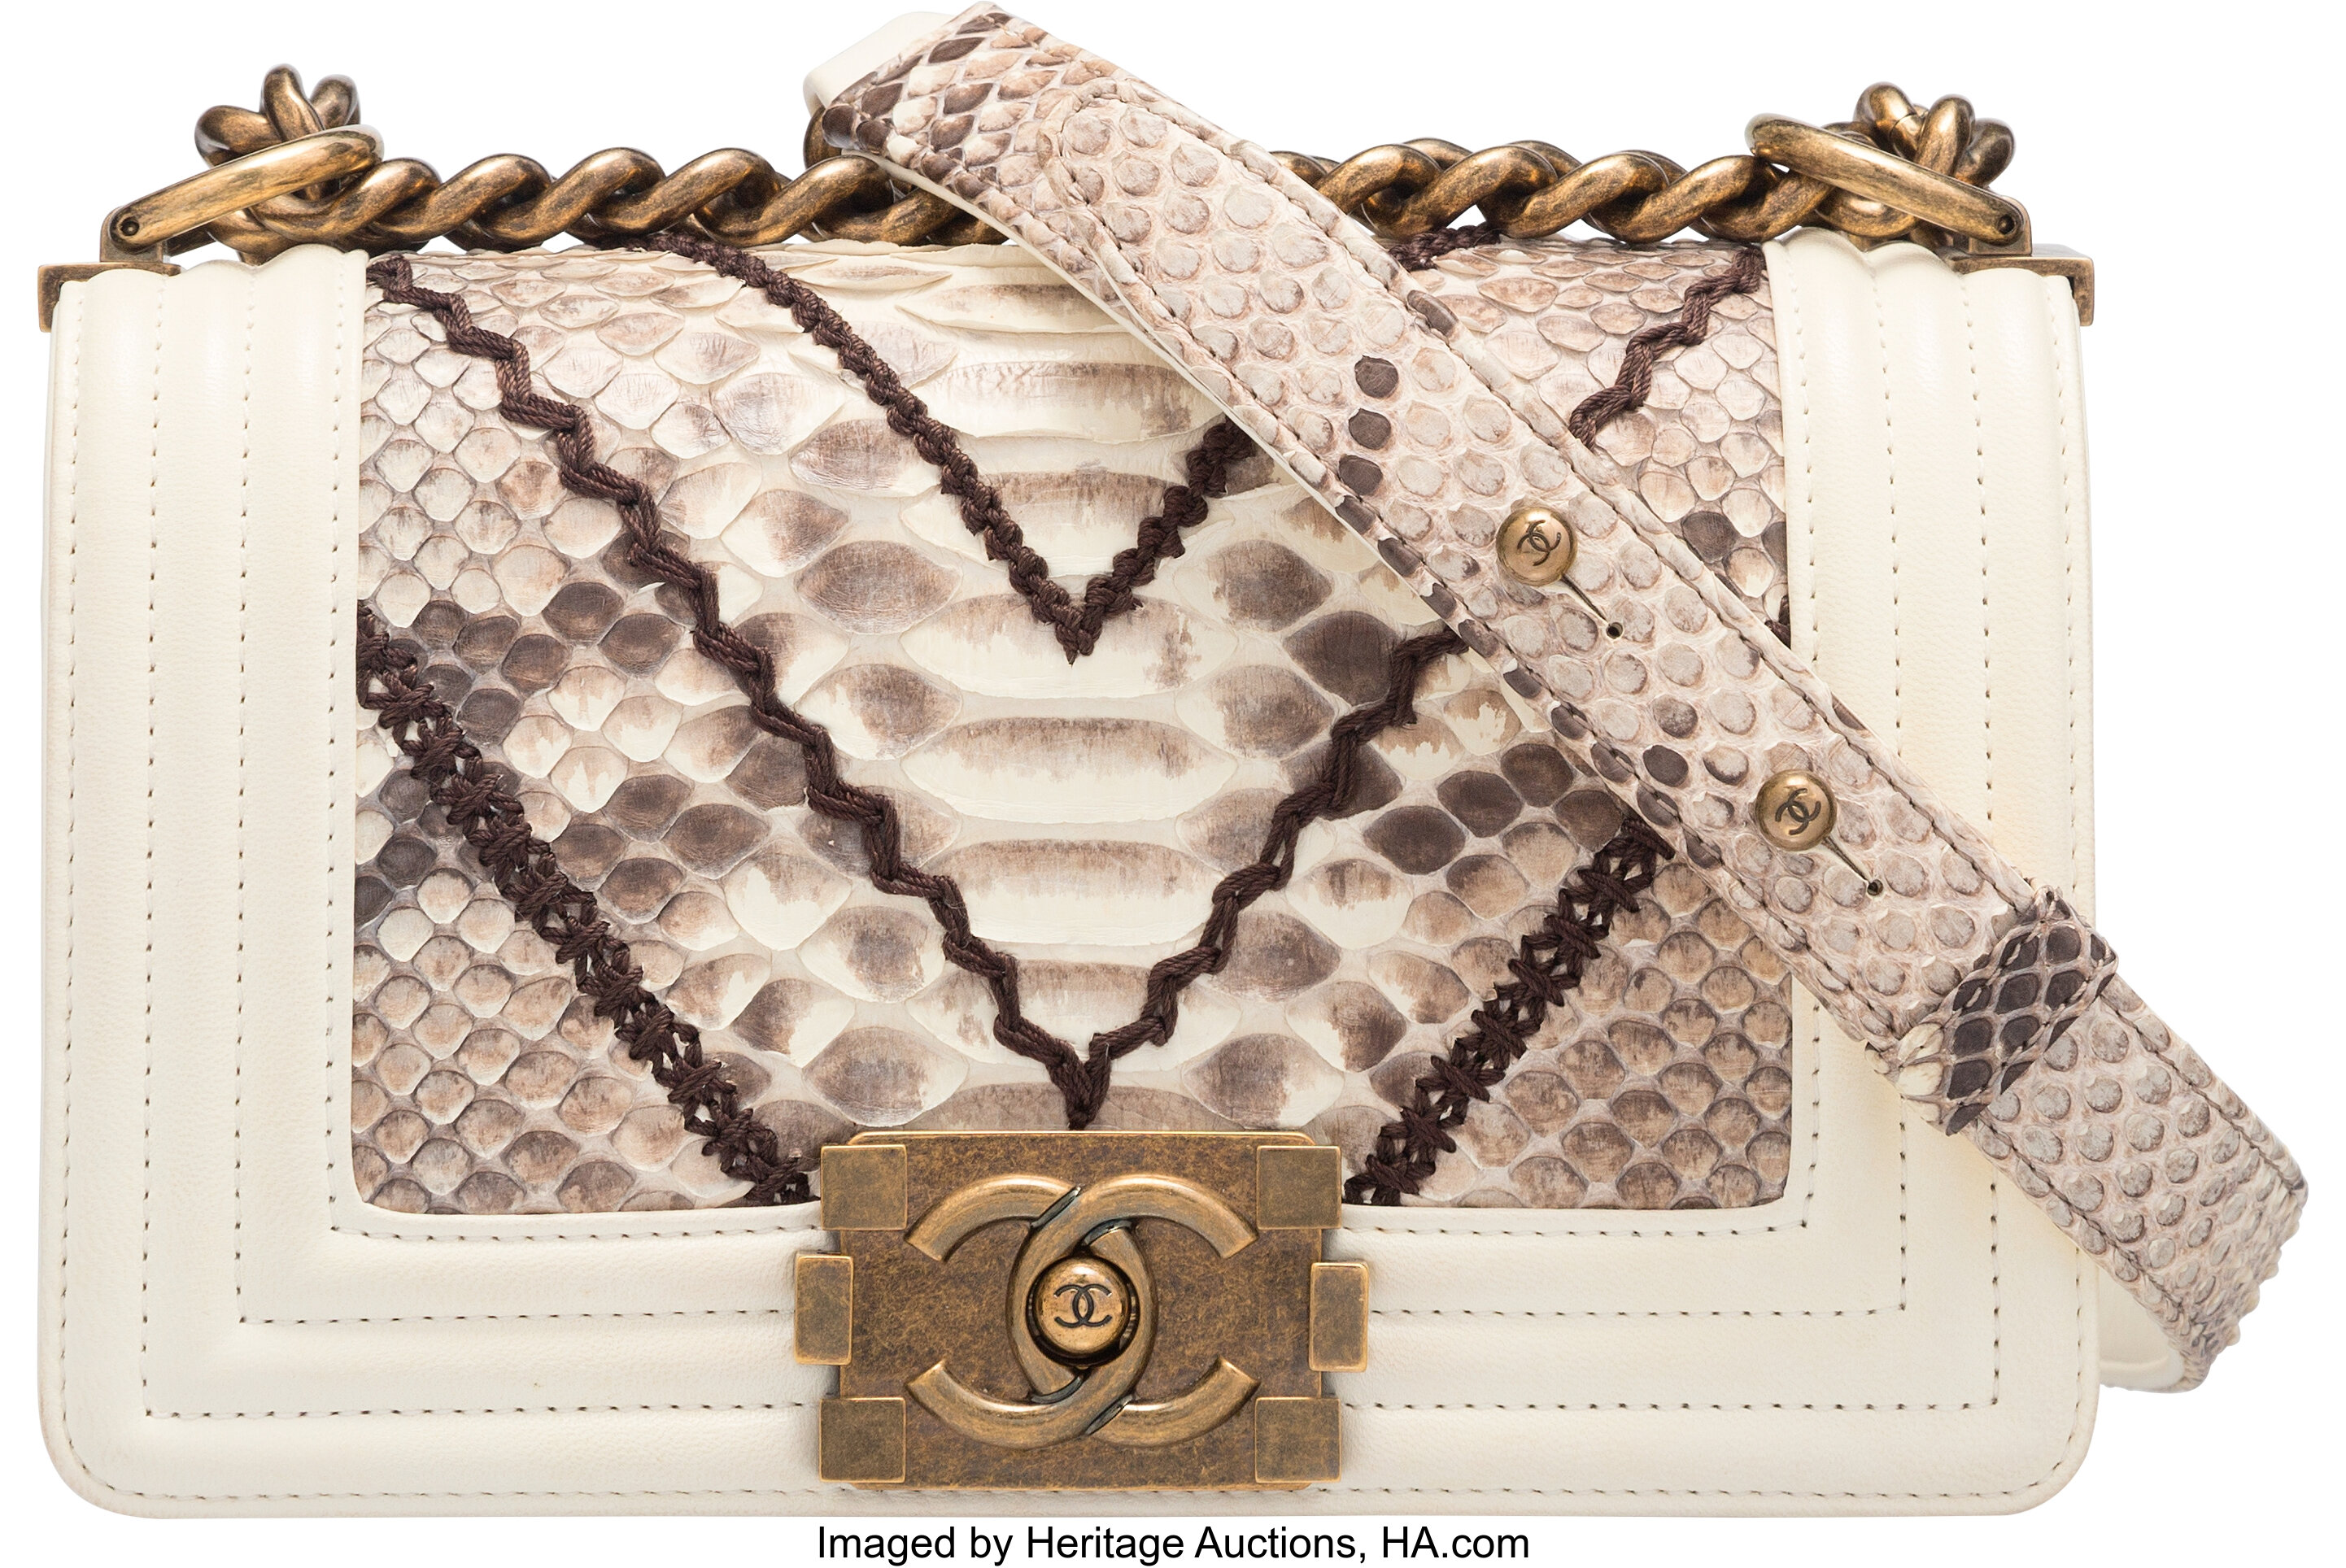 Chanel Classic Beige Caviar Leather Double Flap Bag with Gold Hardware at  Heritage Auctions.